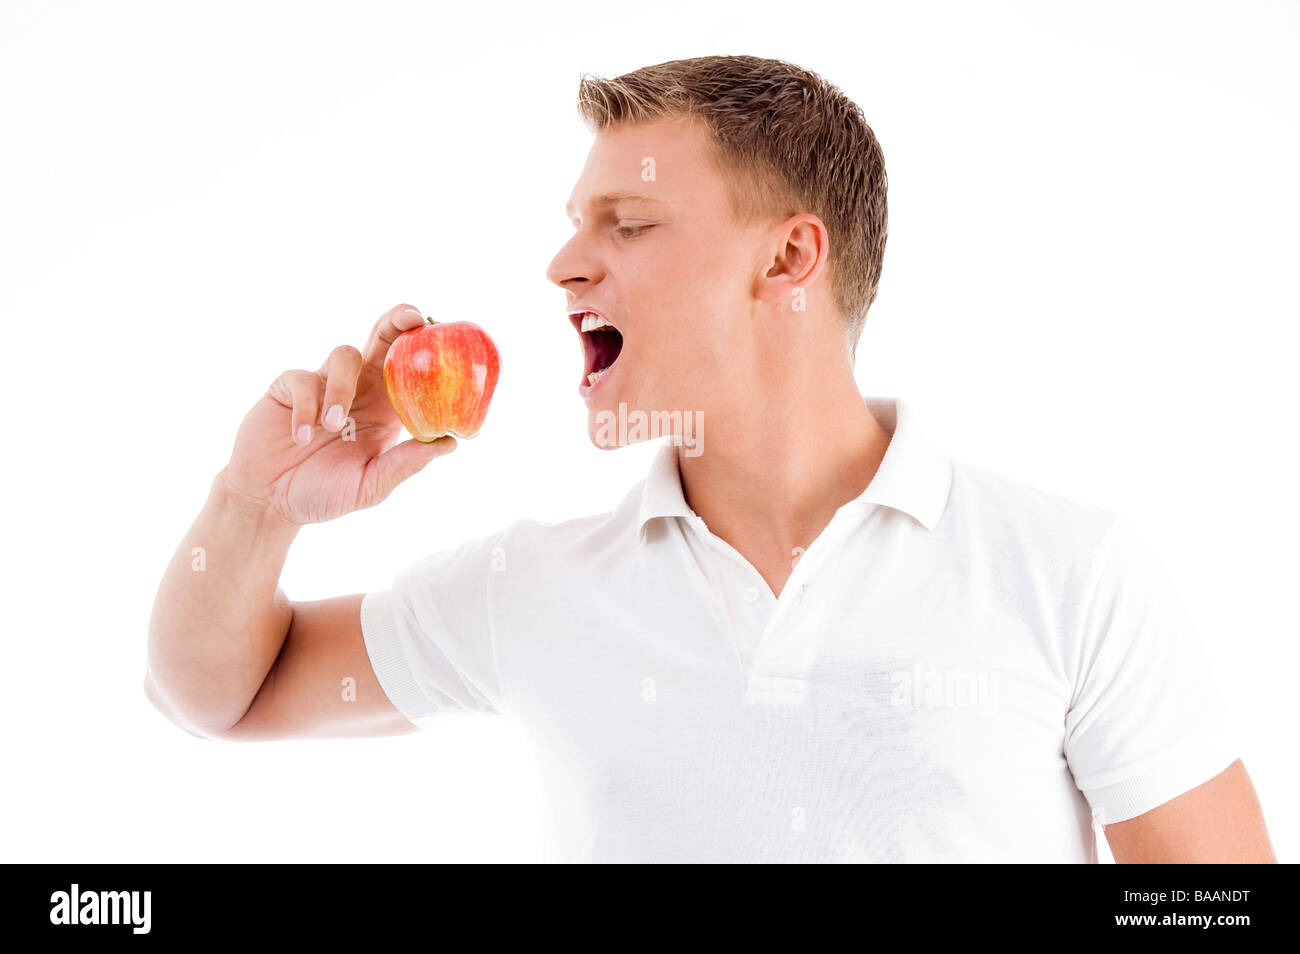 Handsome Man Going To Eat Apple Stock Photo Alamy